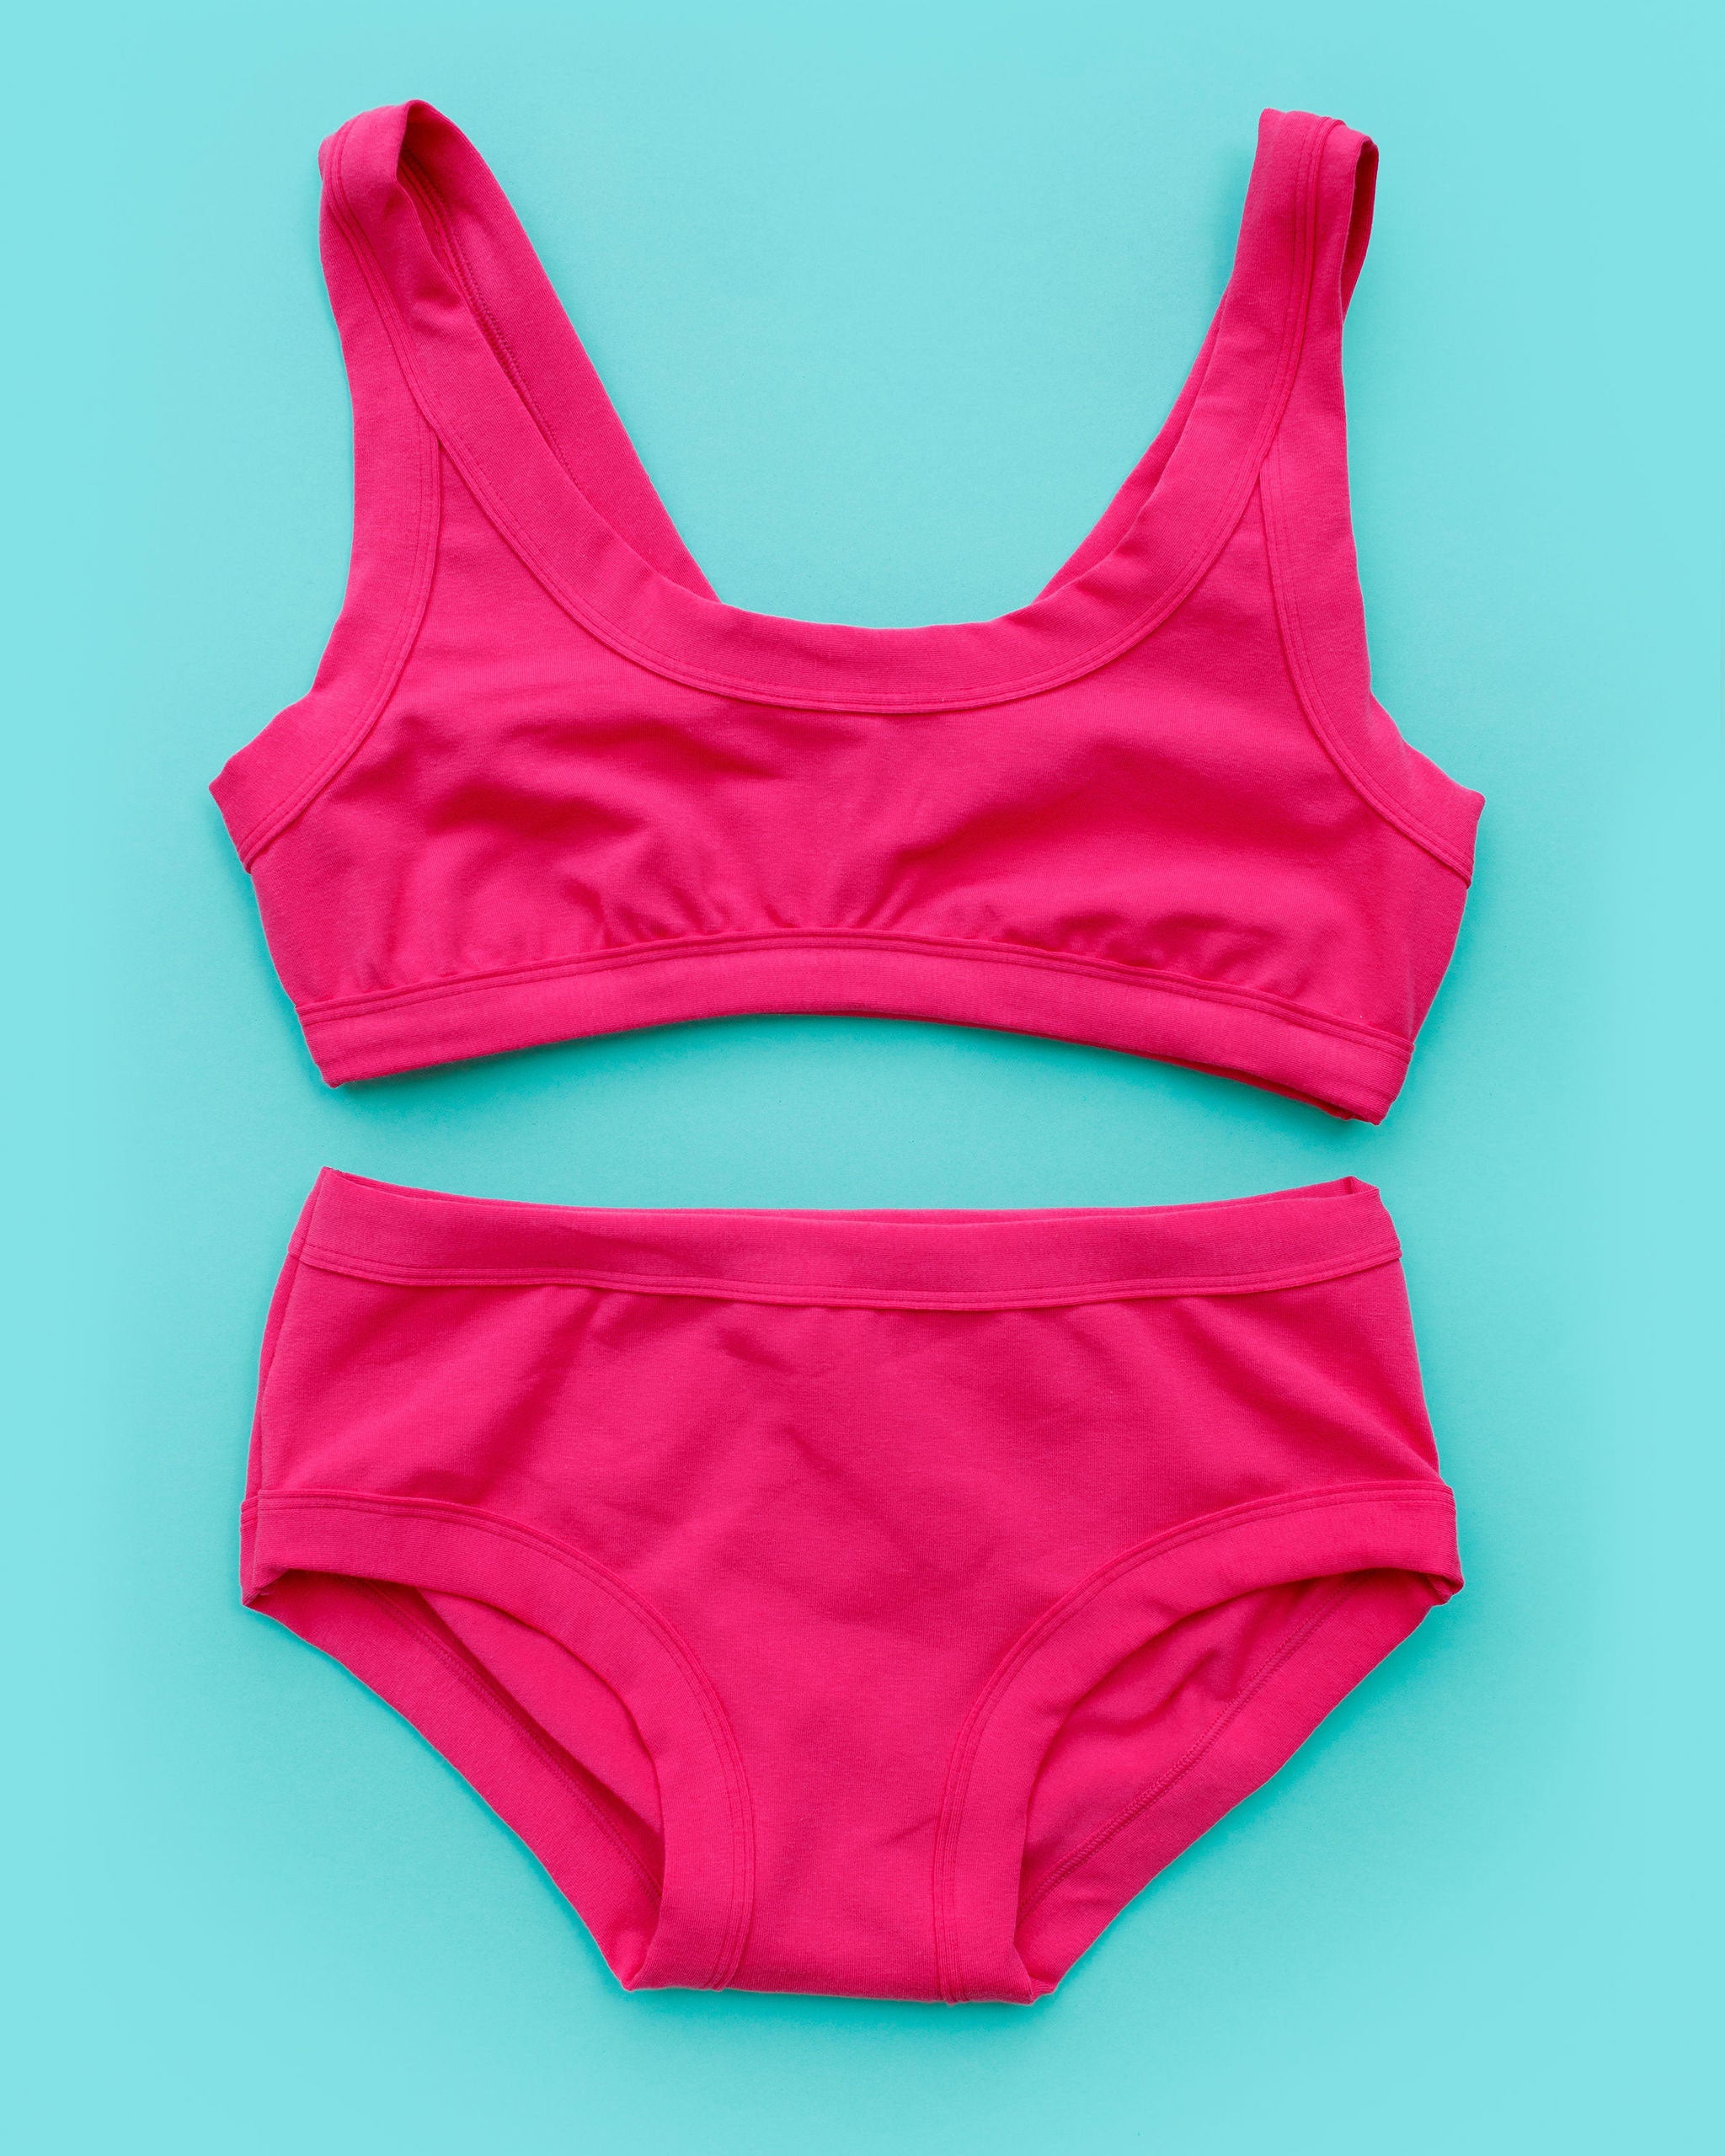 Flat lay of Thunderpants Bralette and Hipster style underwear in a hot pink color.